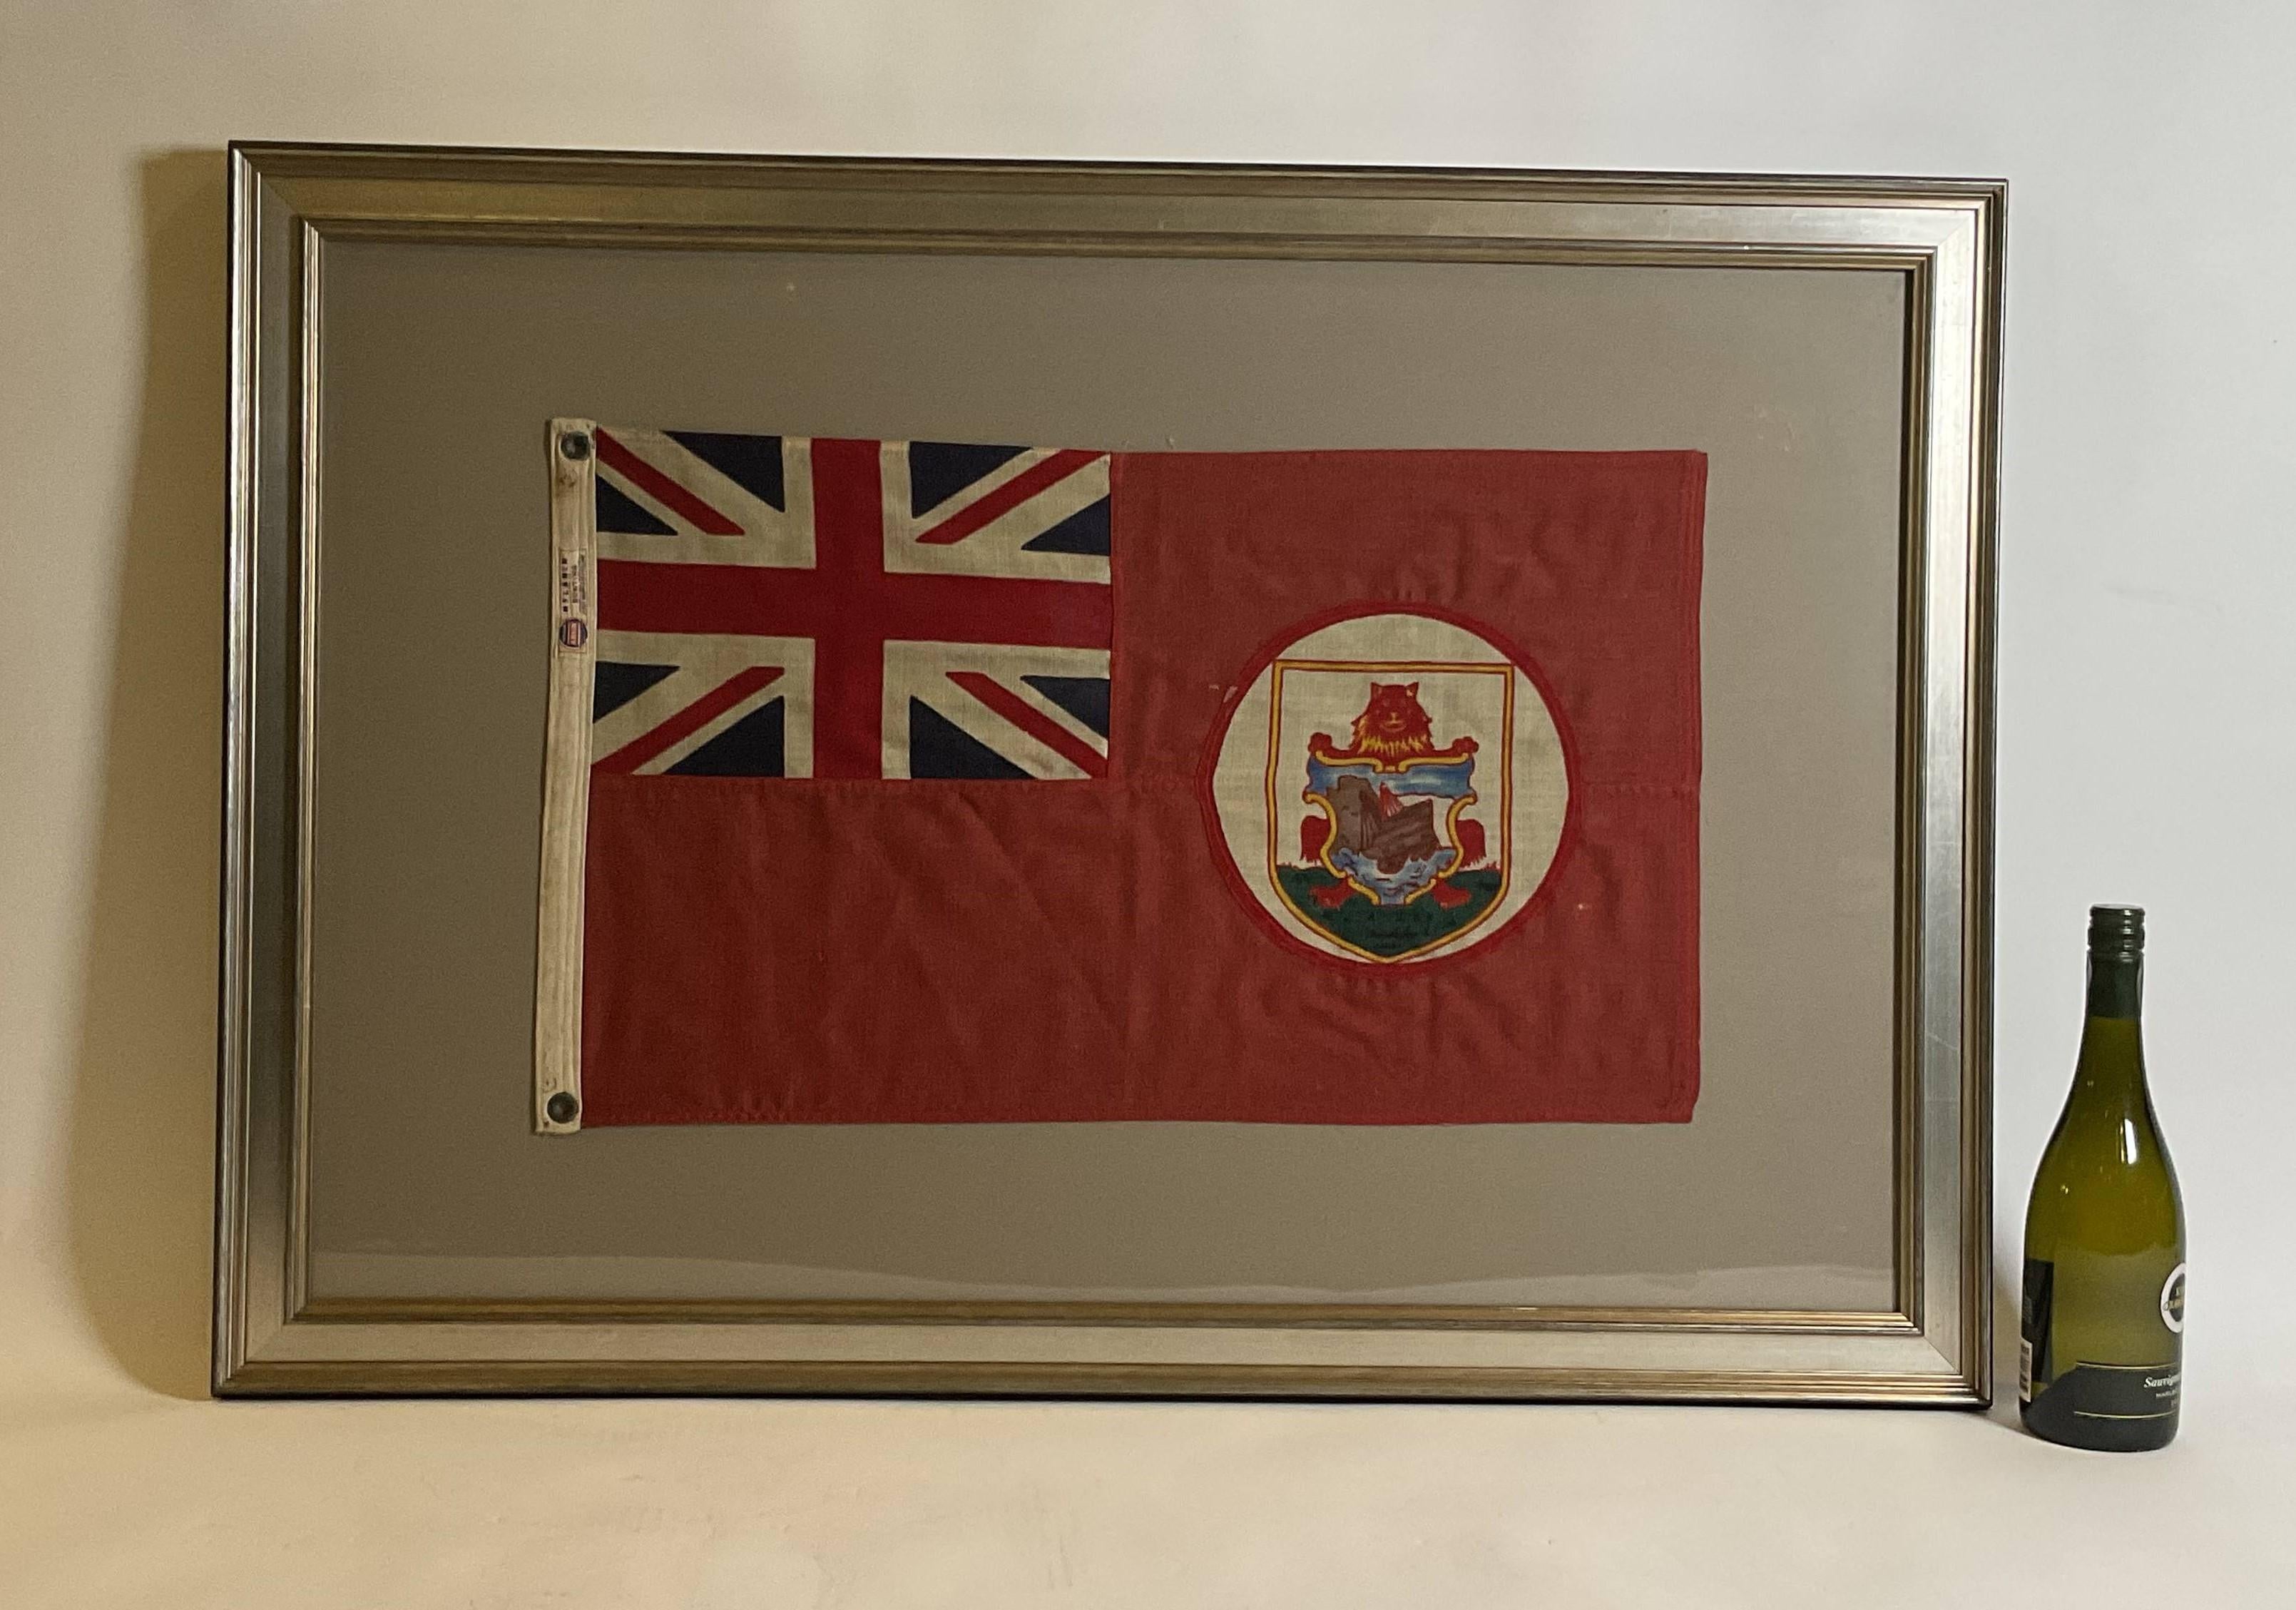 Antique flag for the Island of Bermuda. The flag of the British Overseas Territory of Bermuda as a red ensign was first adopted on 4 October 1910. British red ensign with the union flag in the upper left corner and the coat of arms of Bermuda.